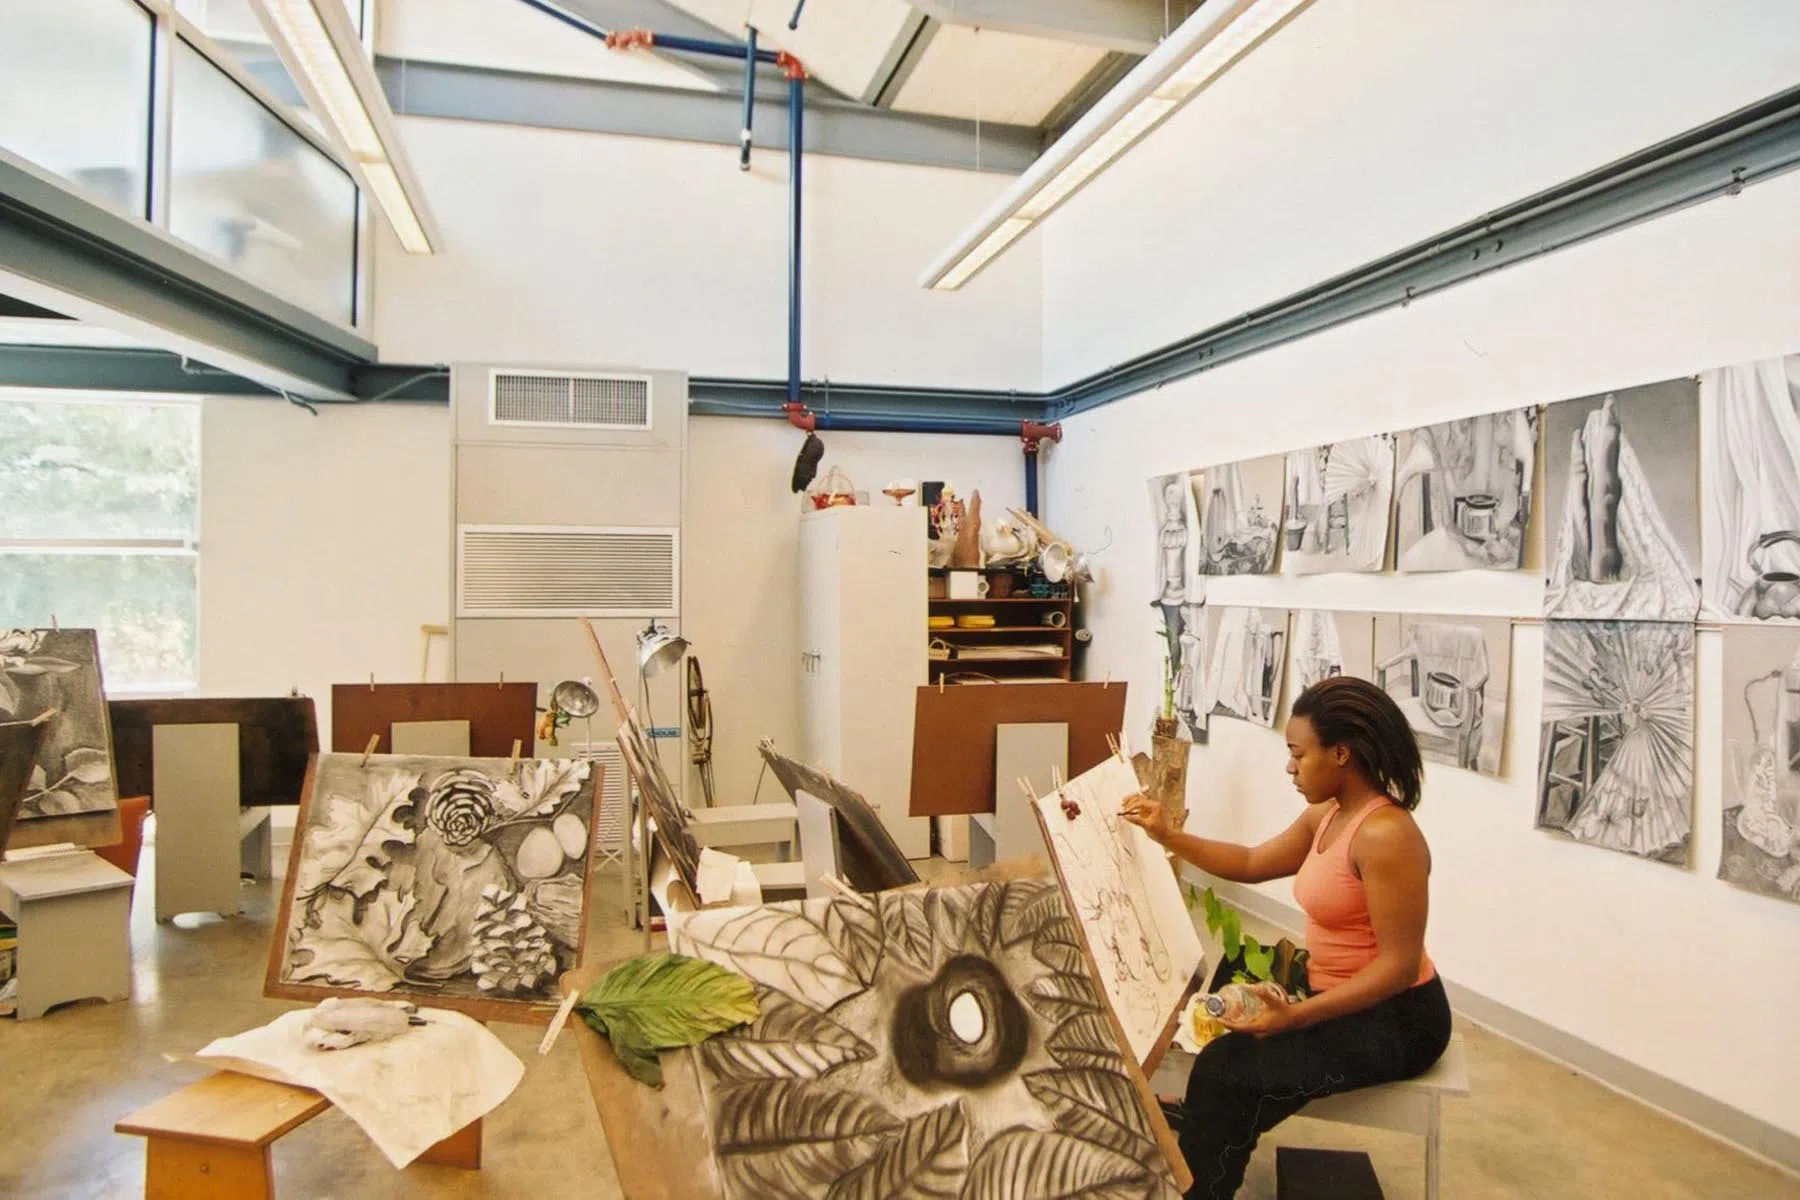 An adult female student sketches on an easel in a large white studio space surrounded by 2- and 3-dimensional art pieces.